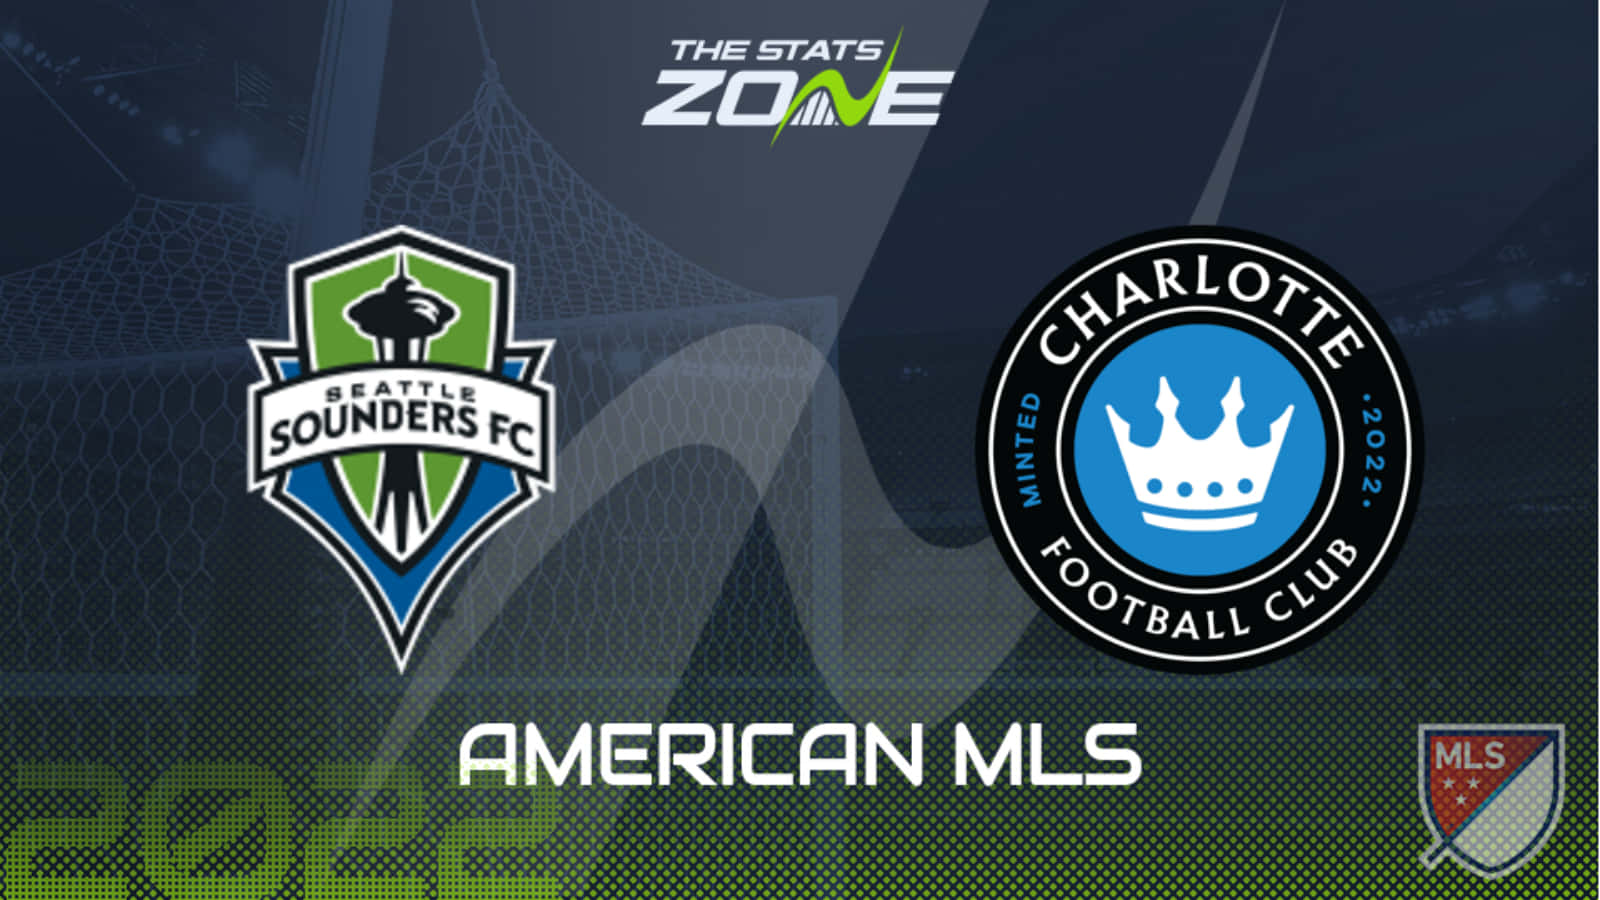 Seattle Sounders FC competing with Charlotte FC in an intense soccer match. Wallpaper